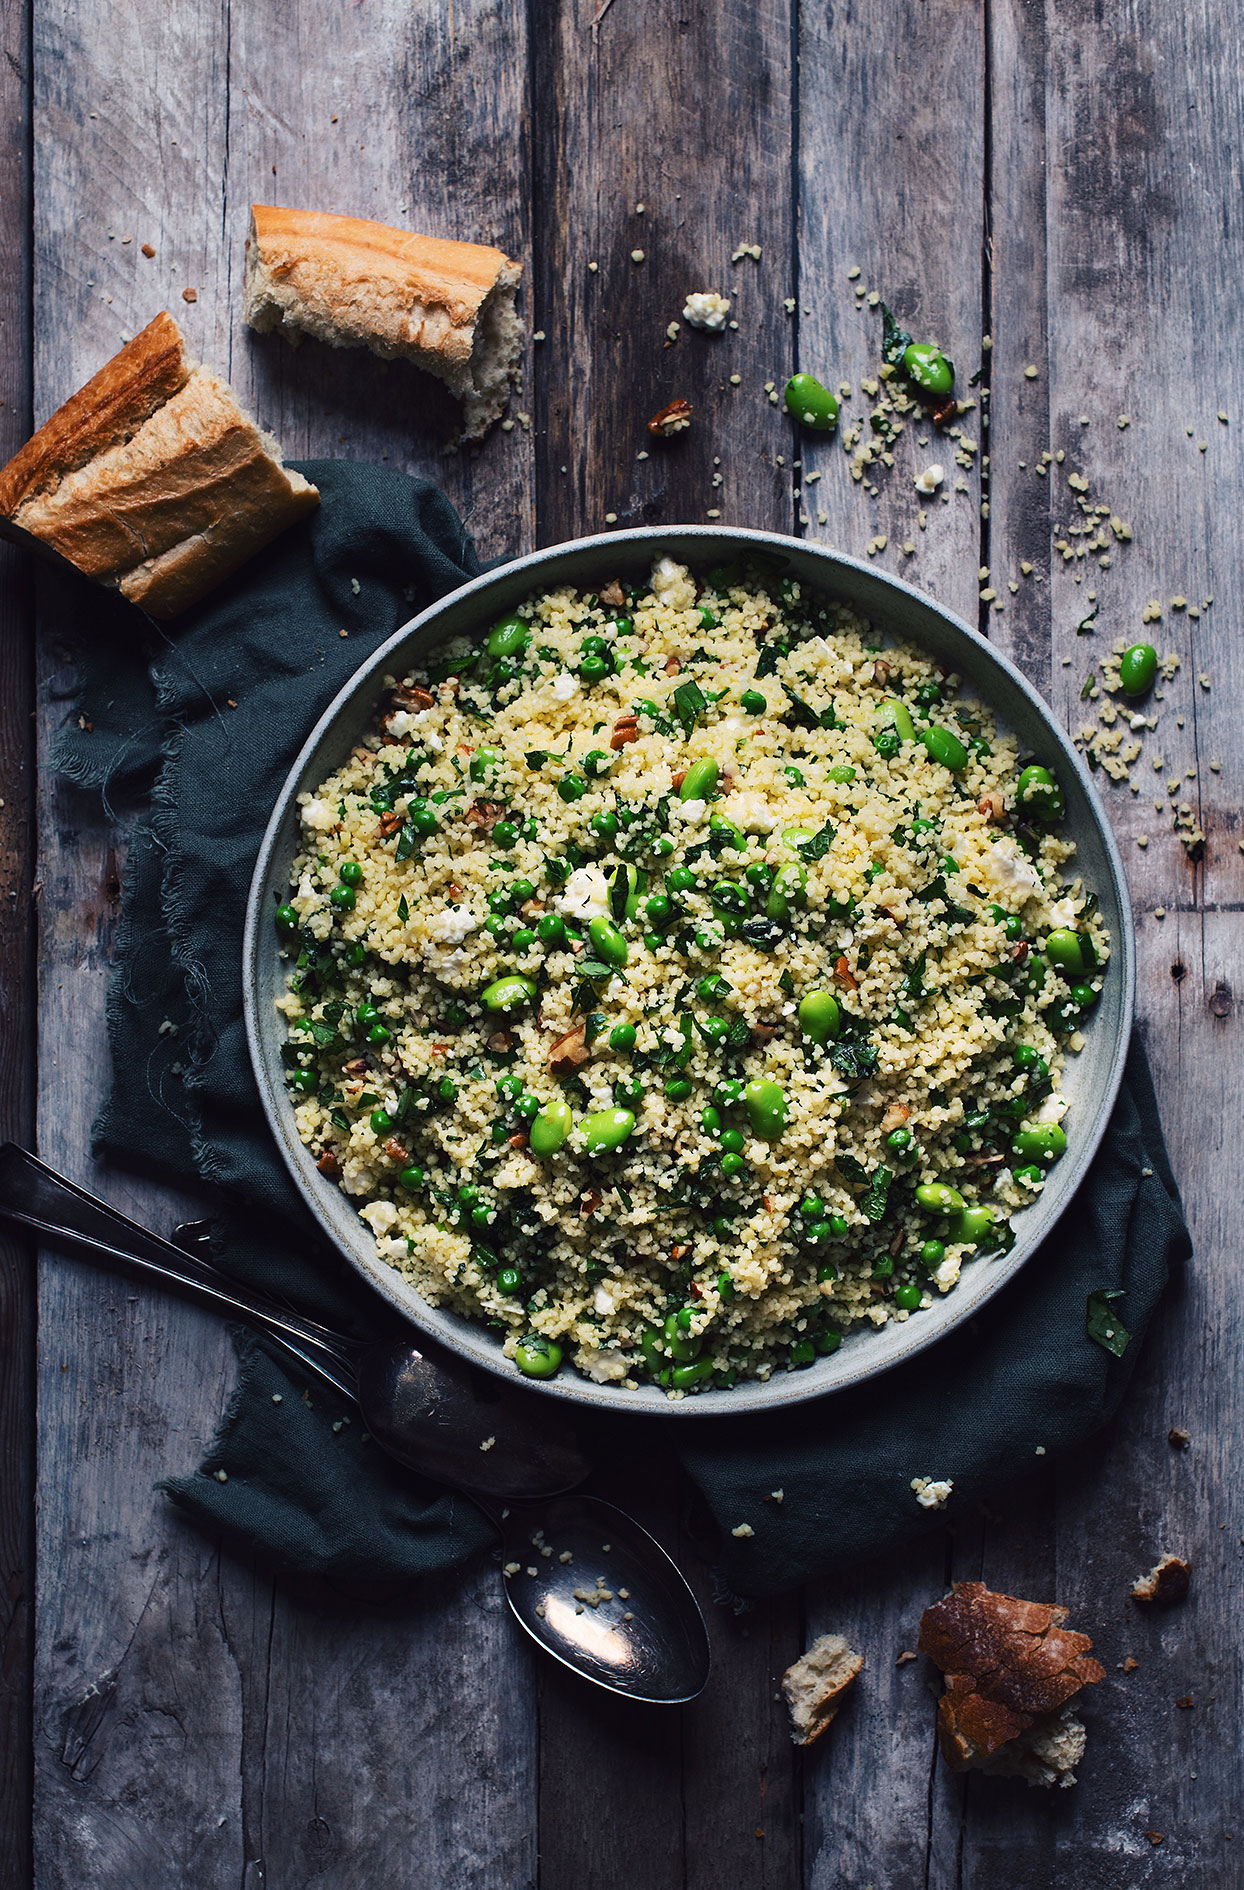 Green couscous salad with pecans, edamame and feta cheese